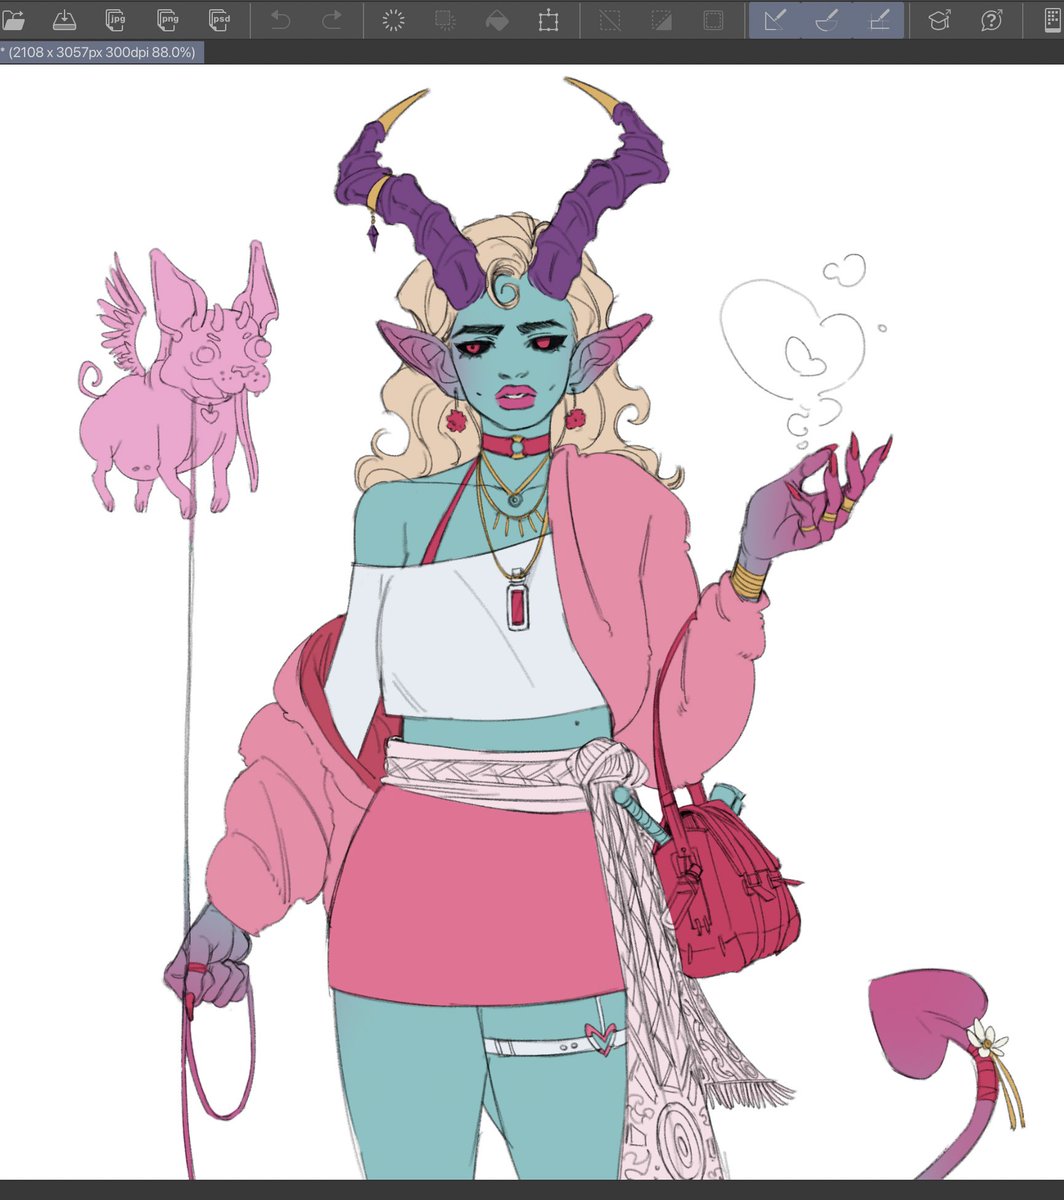 (WIP) Old n new- i never finished the older version(2022) bc i ended up hating it but im having fun with the design of the new one hopefully someone buys her or else she will be mine👿 gonna try to finish next week....